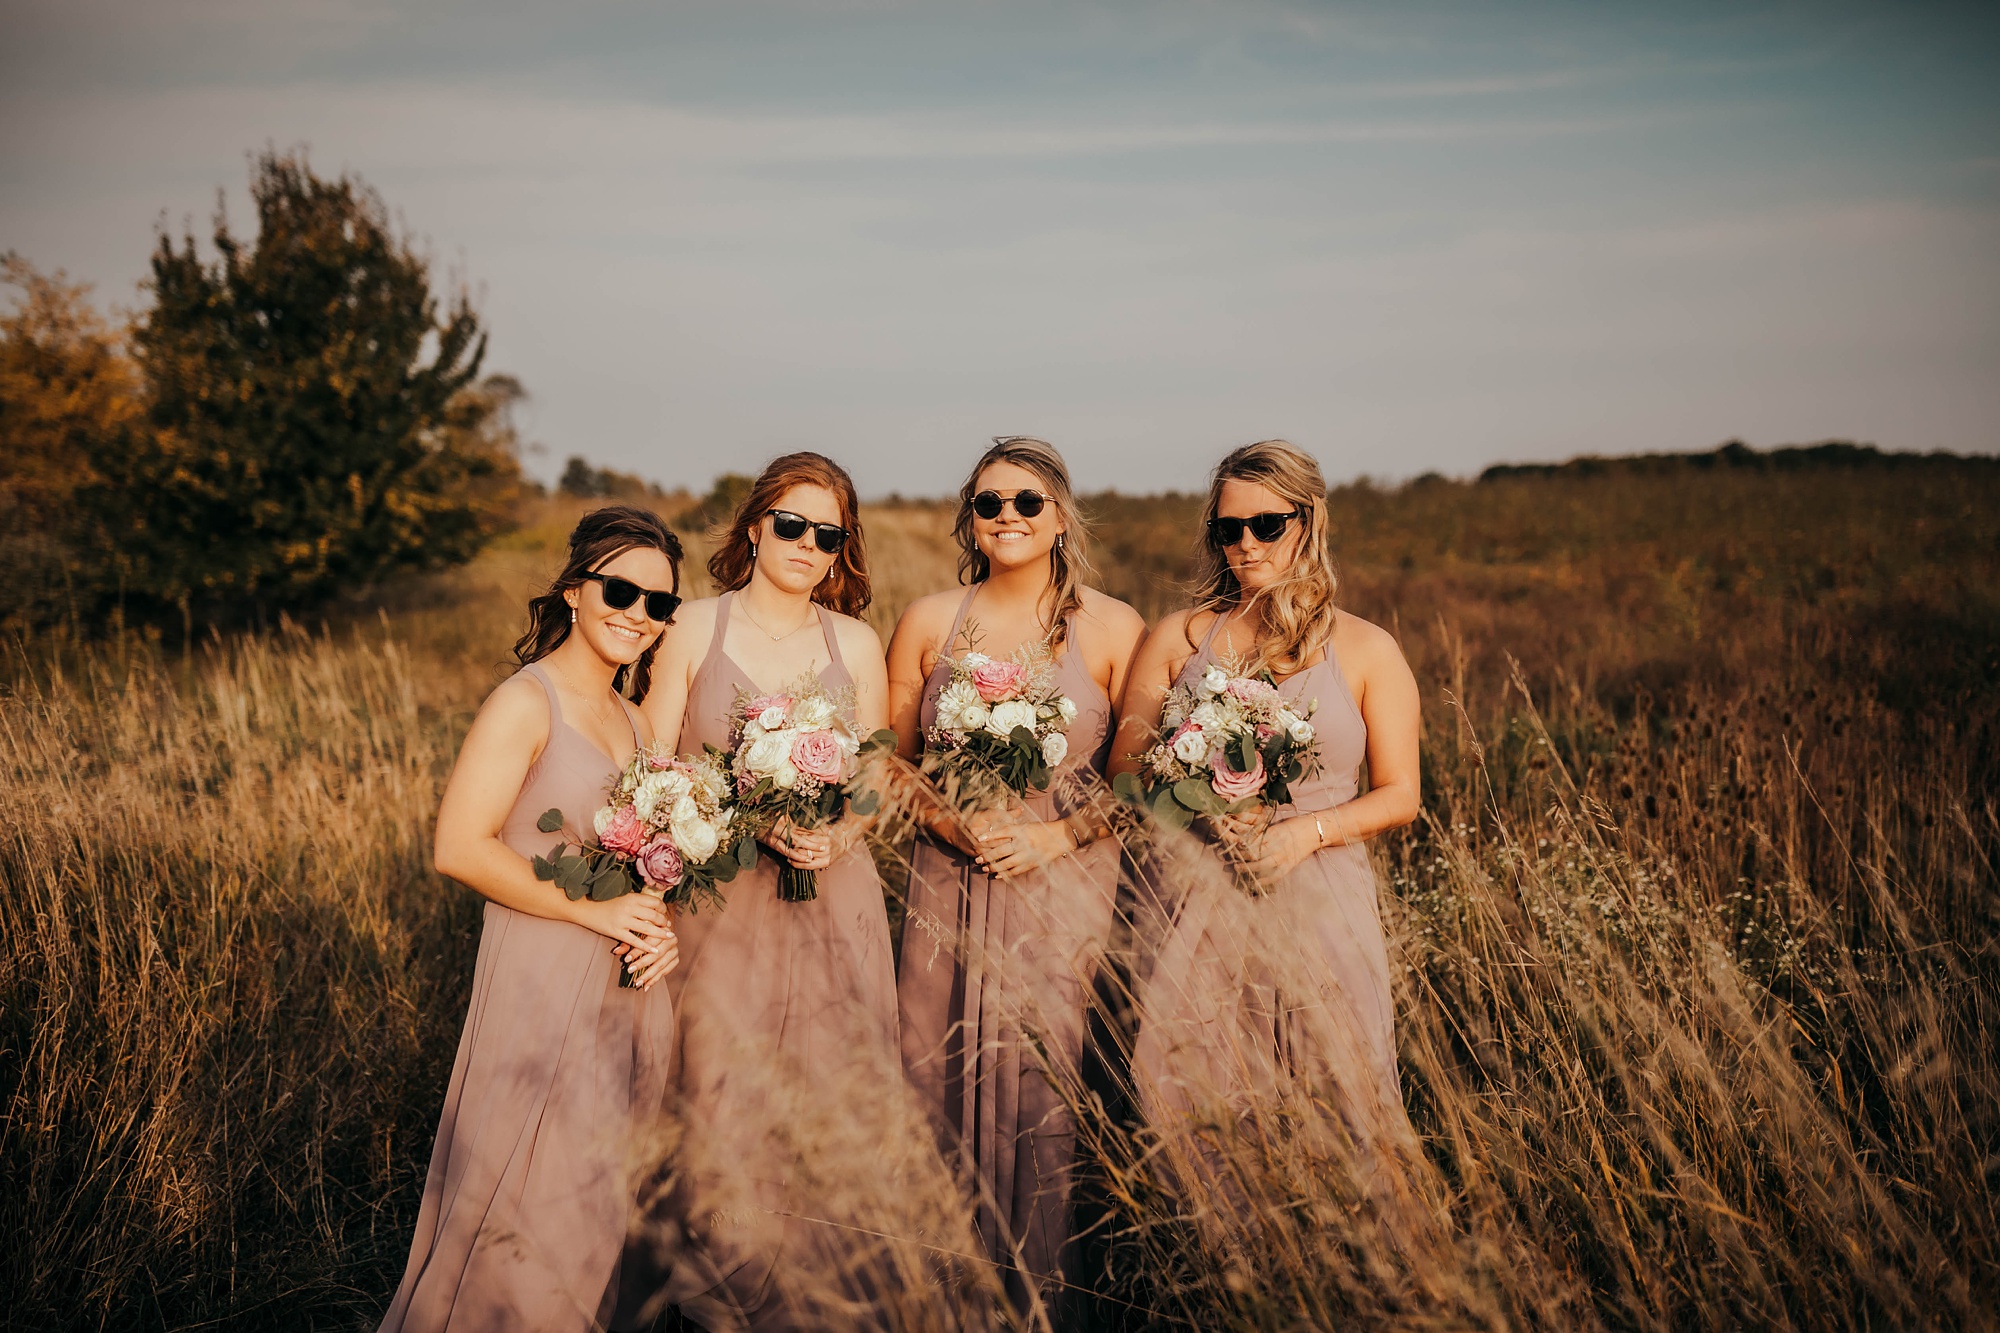 bridesmaids in pink gowns with bouquets pose in fields with sunglasses